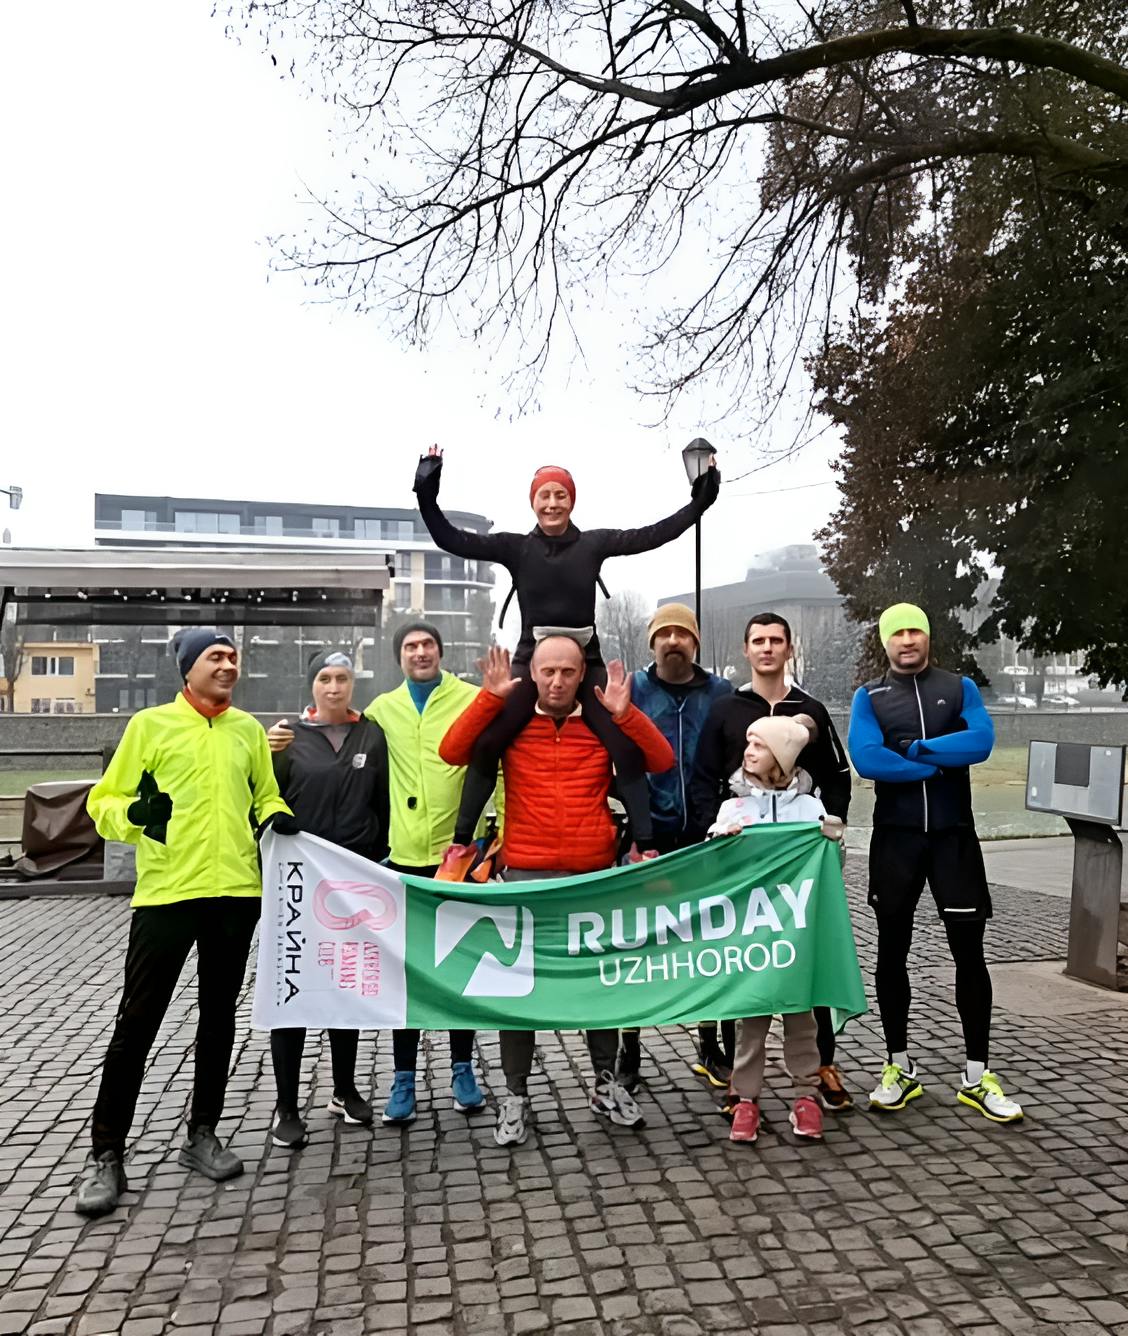 Pictured: participants of the weekly 5 km RUNDAY Uzhhorod race